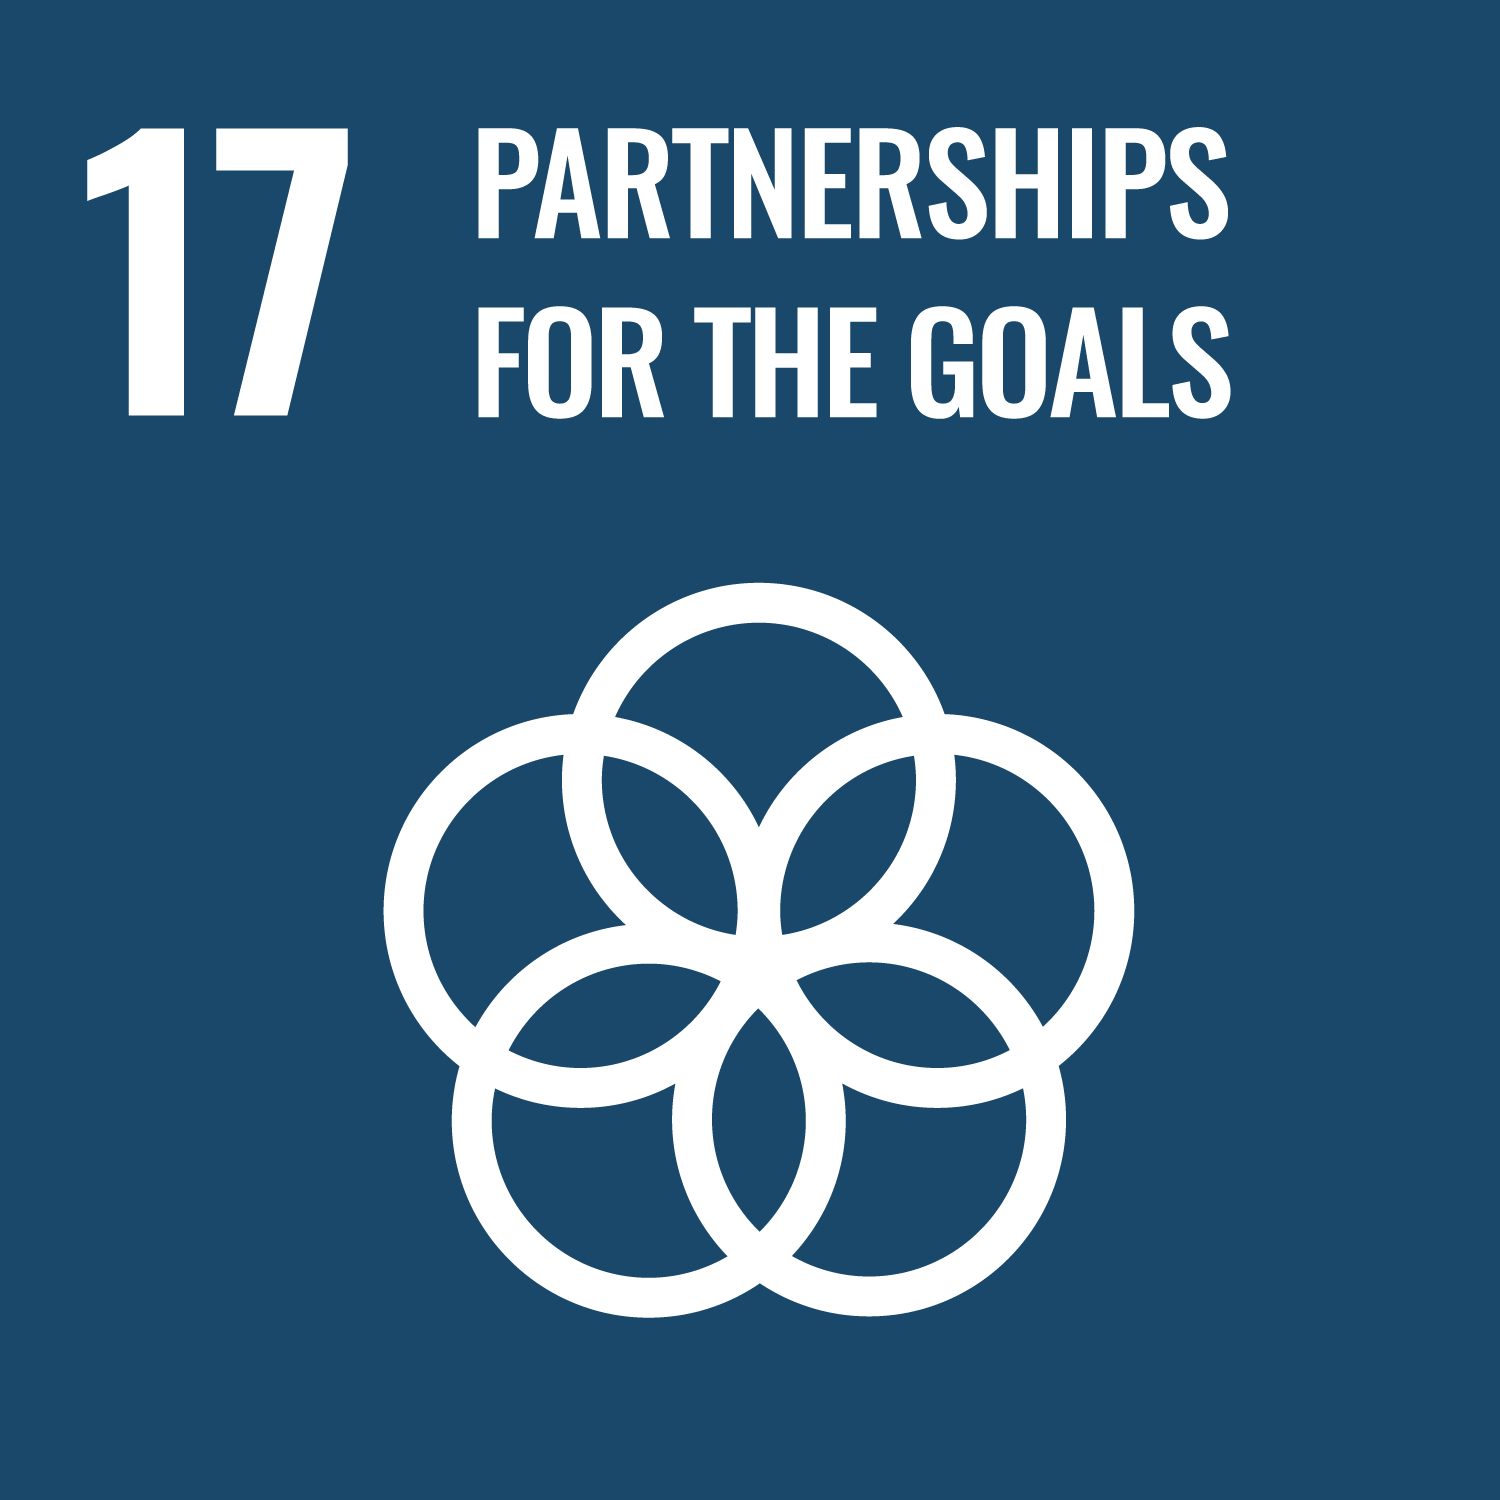 The Standards Alliance: Phase 2 project contributes to this global goal